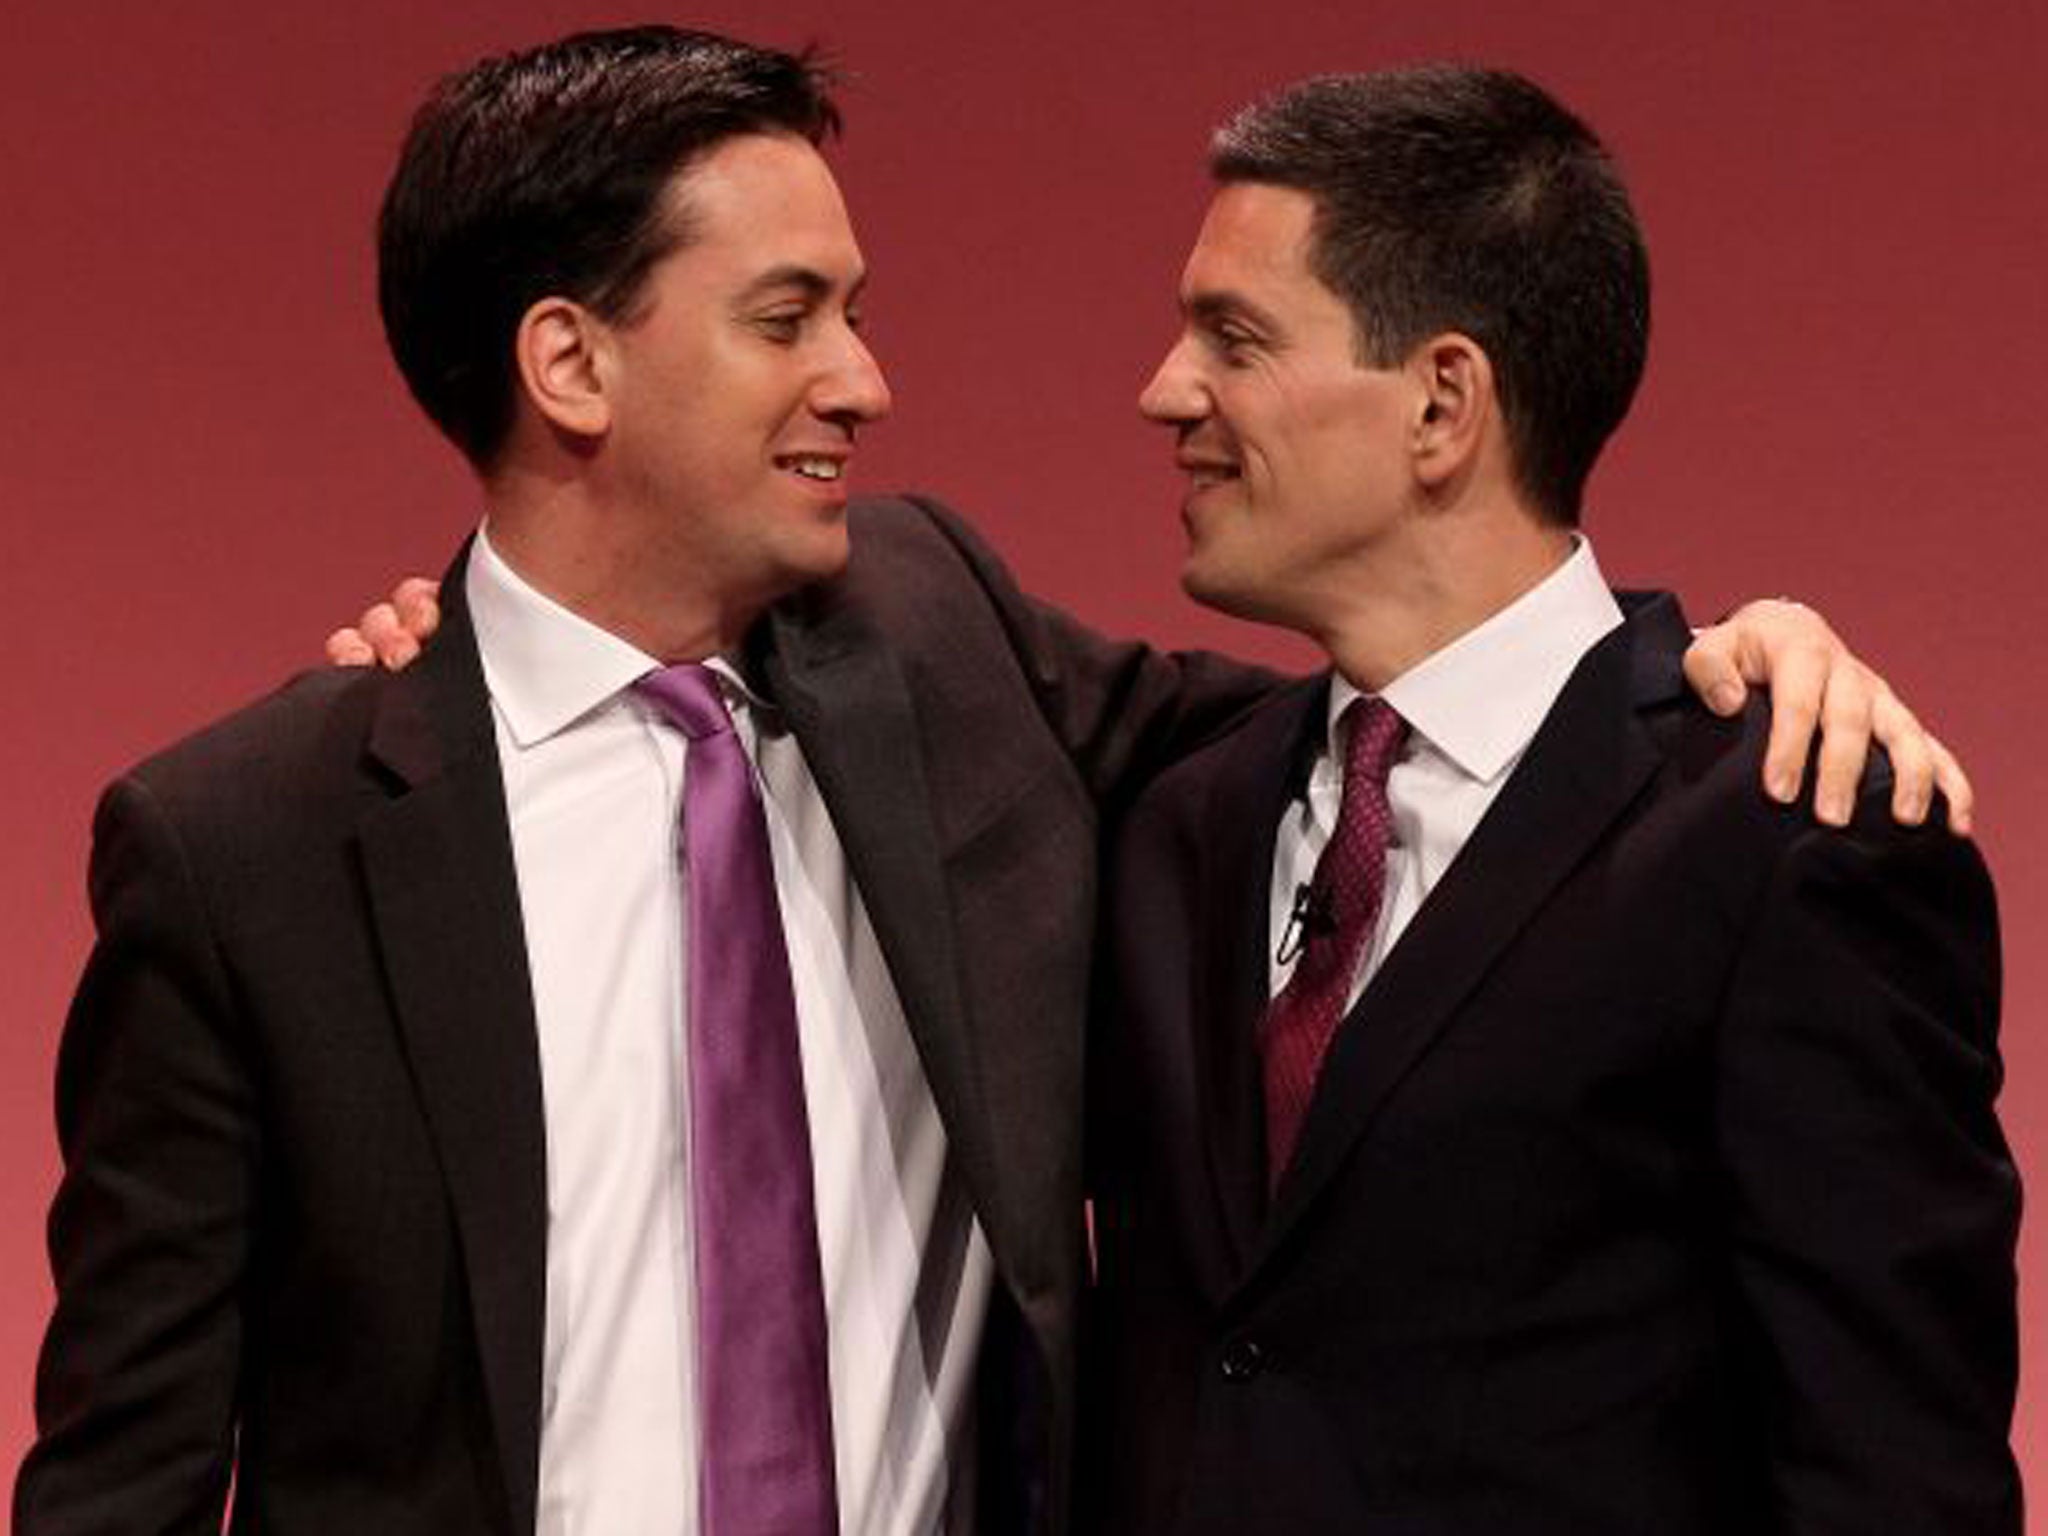 David Miliband, right, is embraced by his brother party leader Ed Miliband